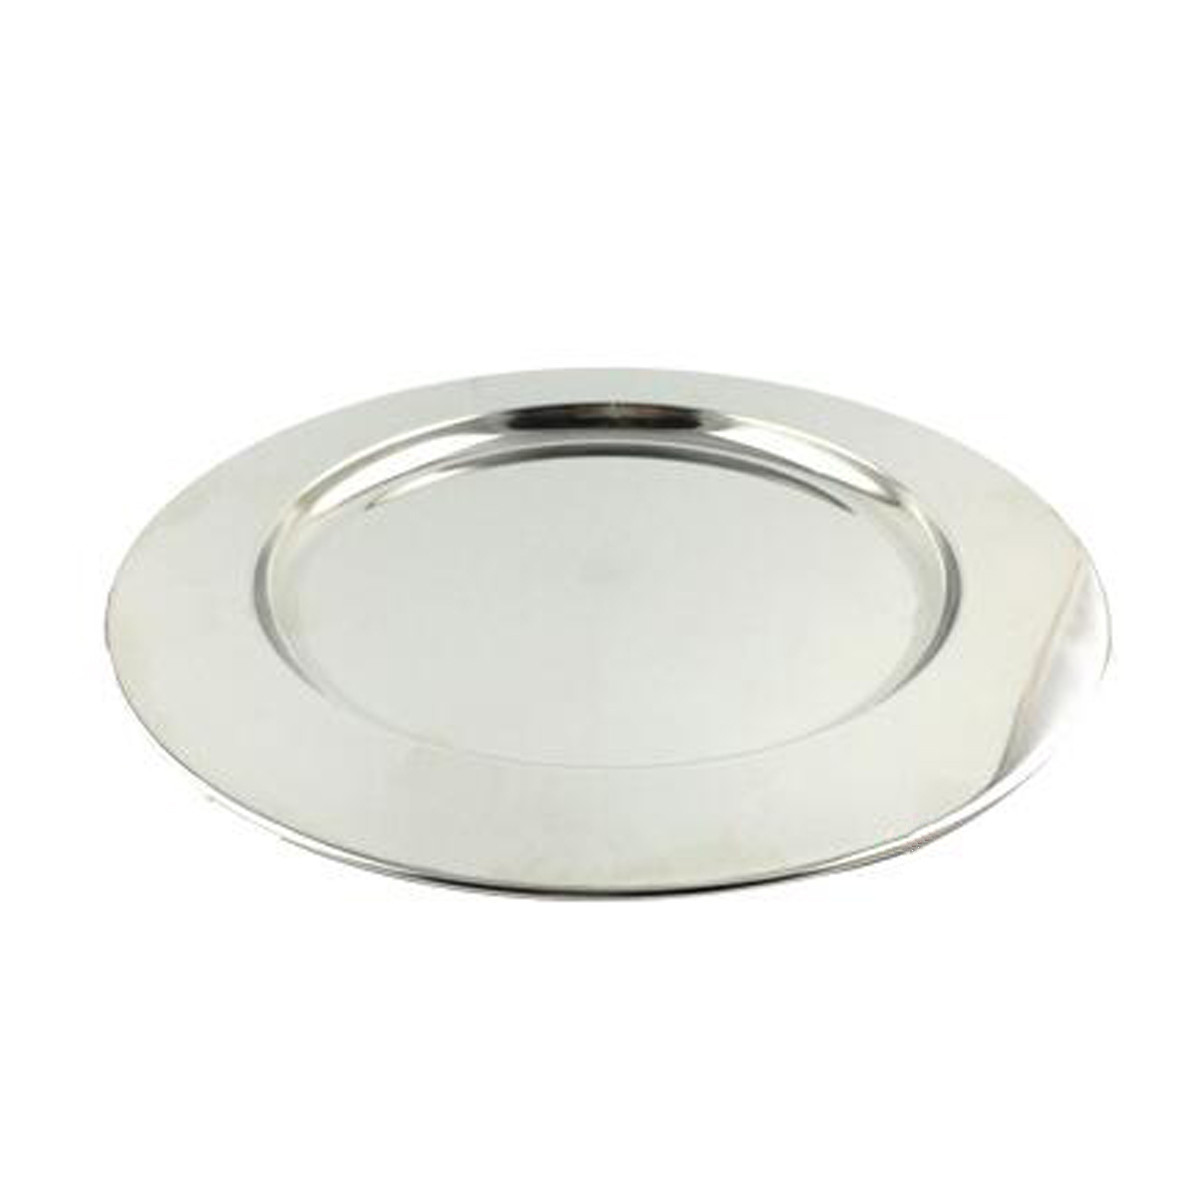 GL-ELY1240 8.6inch Stainless Steel Plate